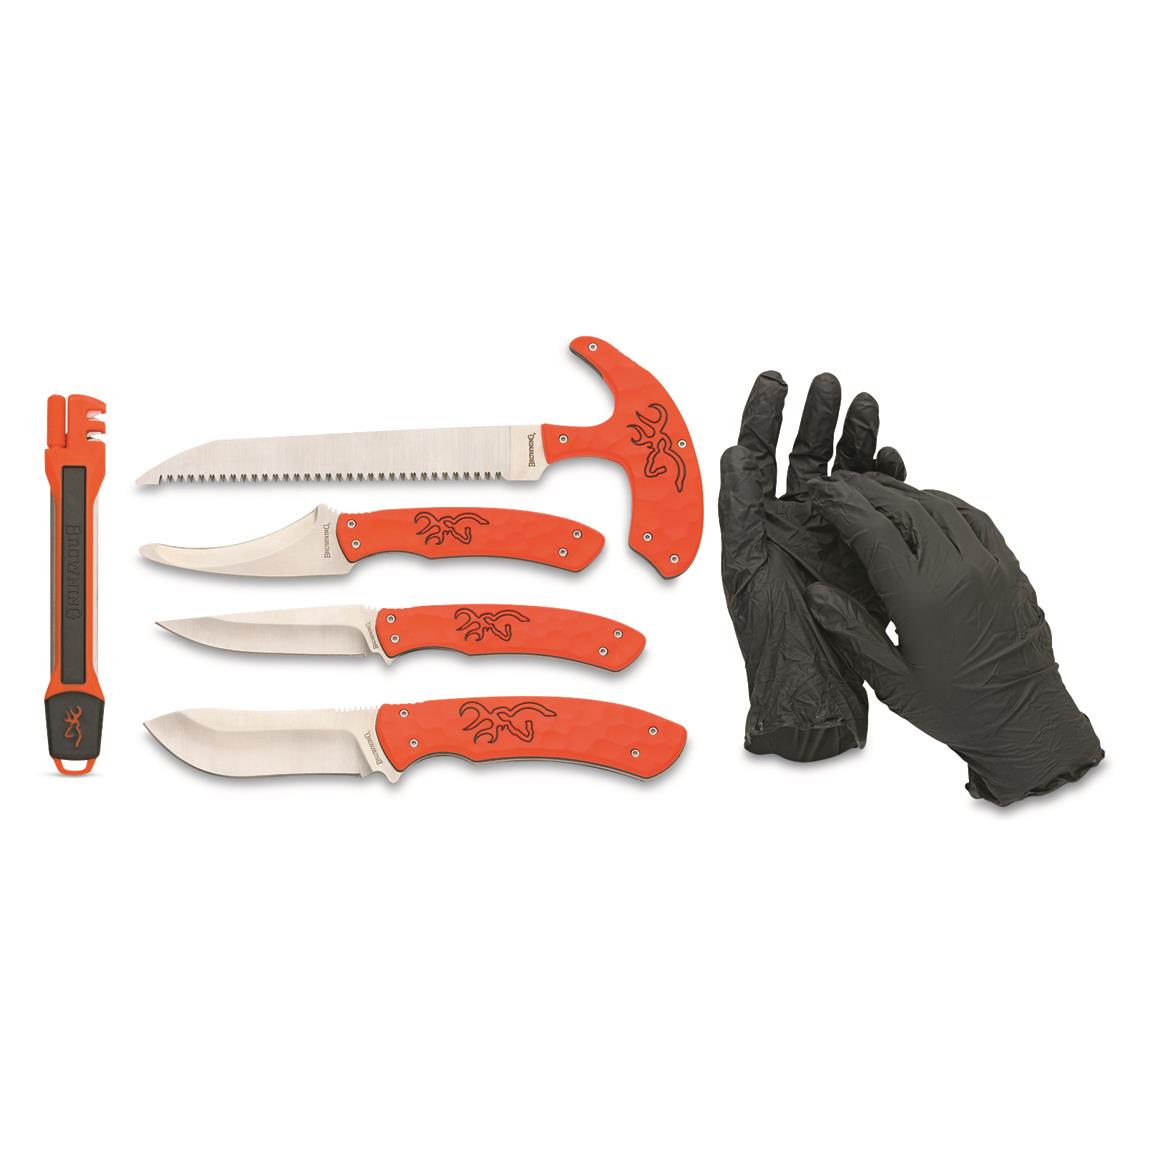 Zwilling J.A. Henckels Twin Master Butcher Knife Set, 8 Piece - 713408,  Field Care Knives at Sportsman's Guide